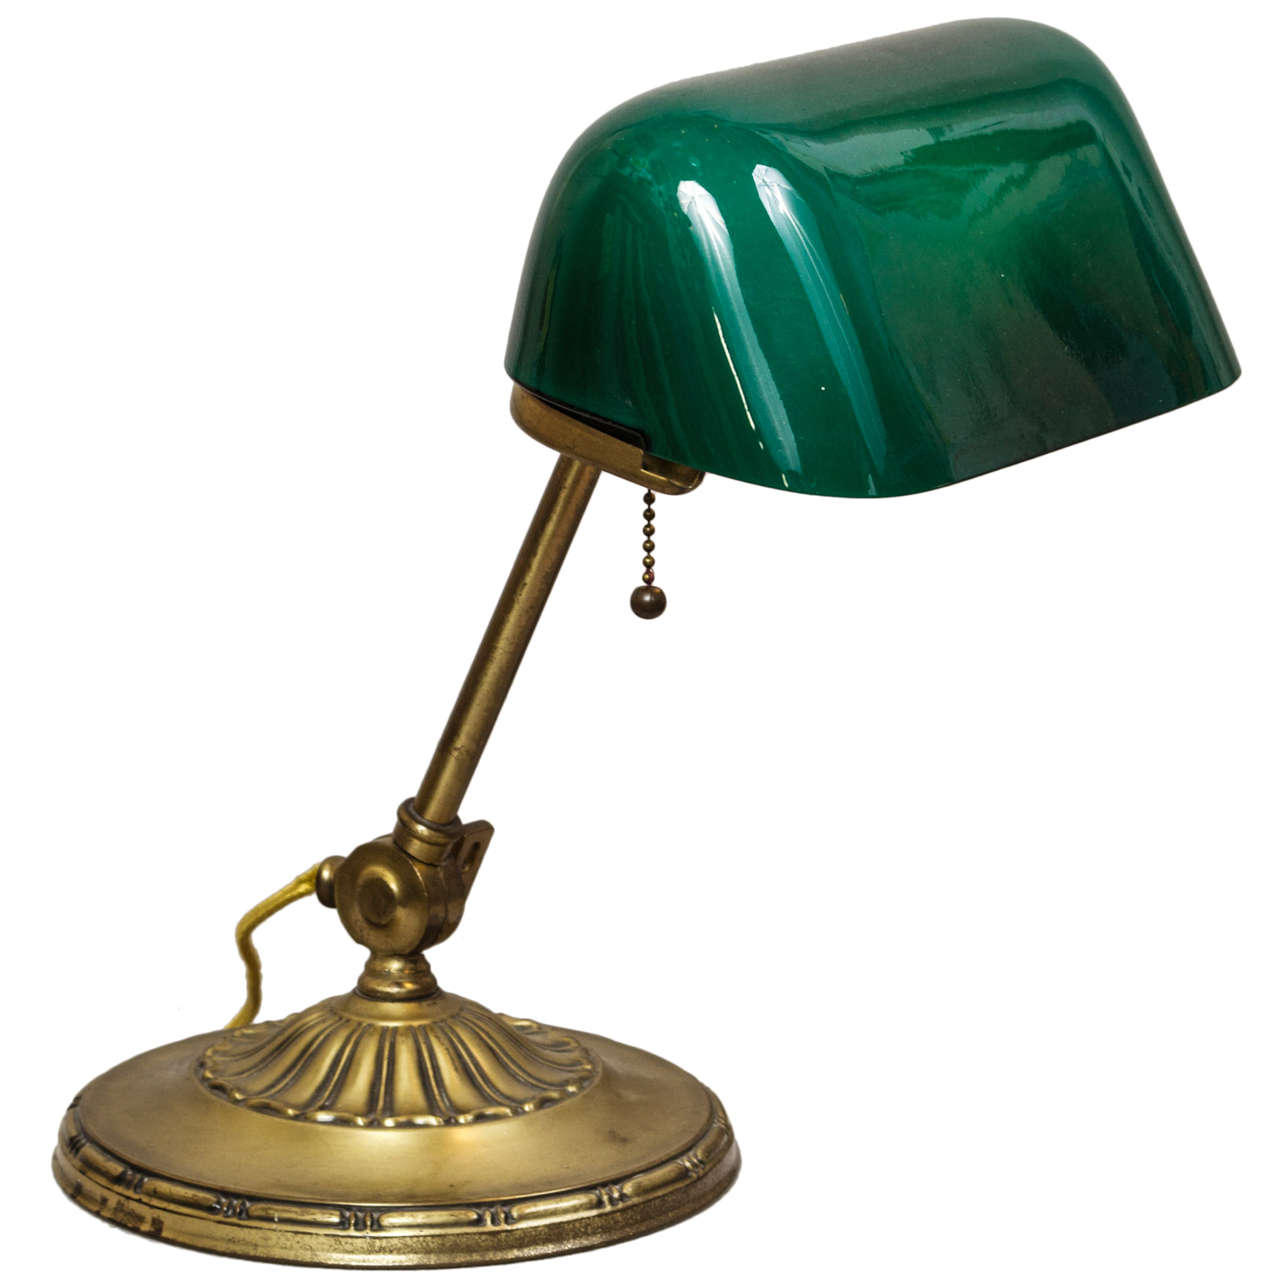 Banker's Lamp with Green Cased Glass Shade